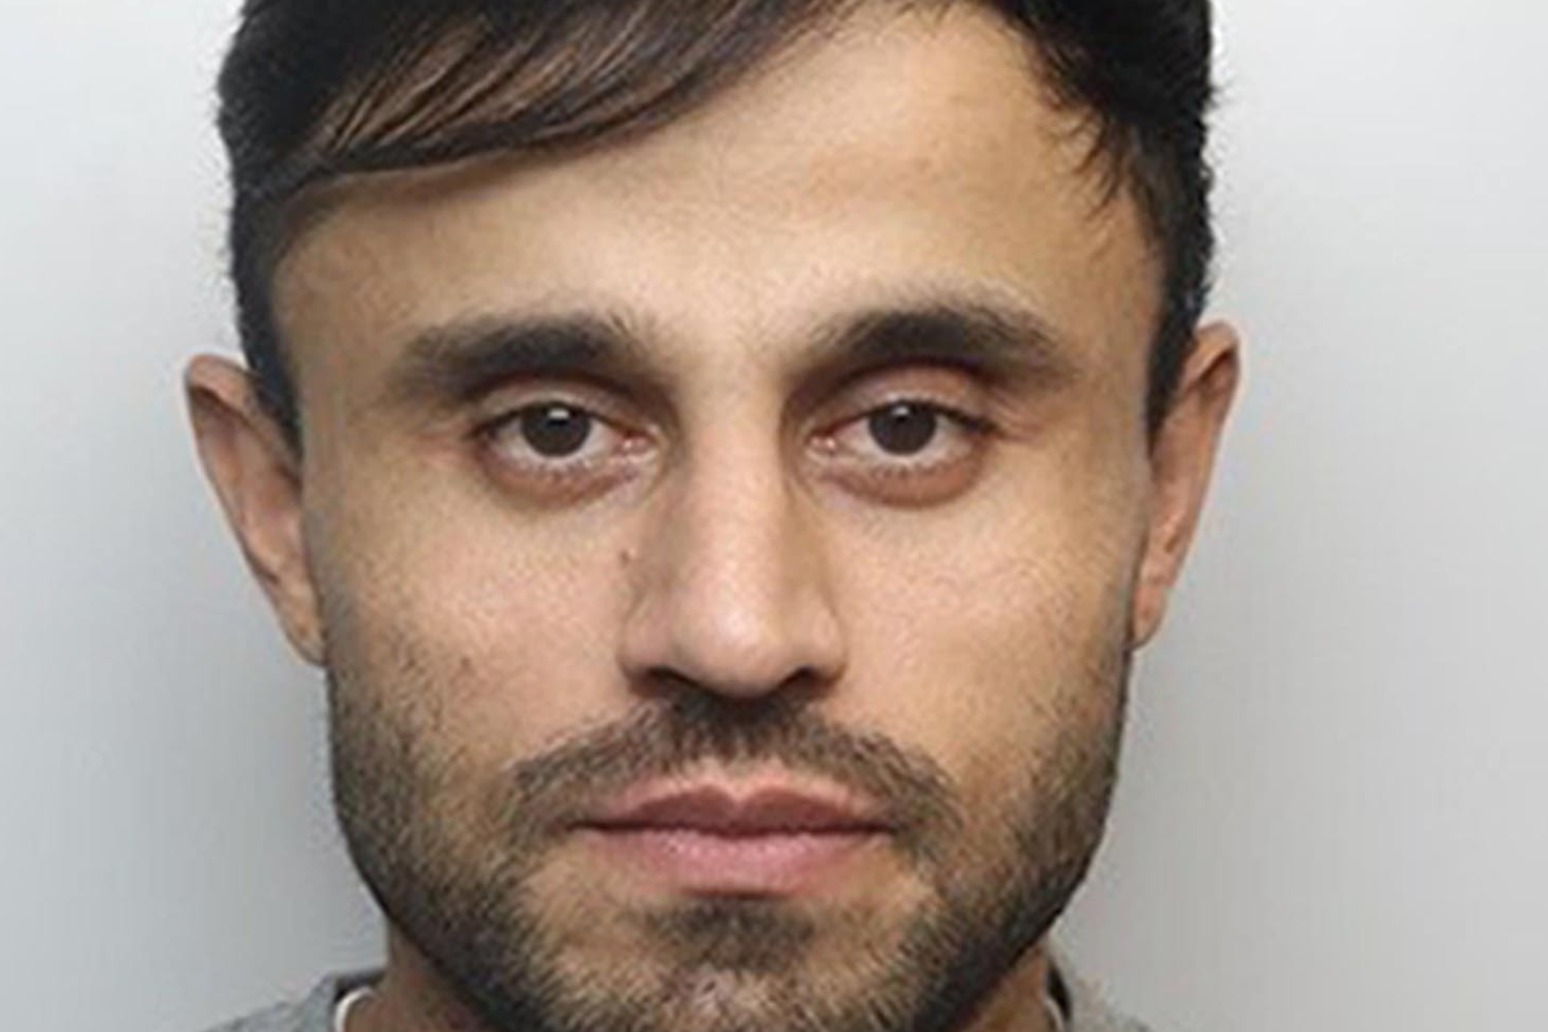 Man found guilty of drugging and sexually assaulting two victims